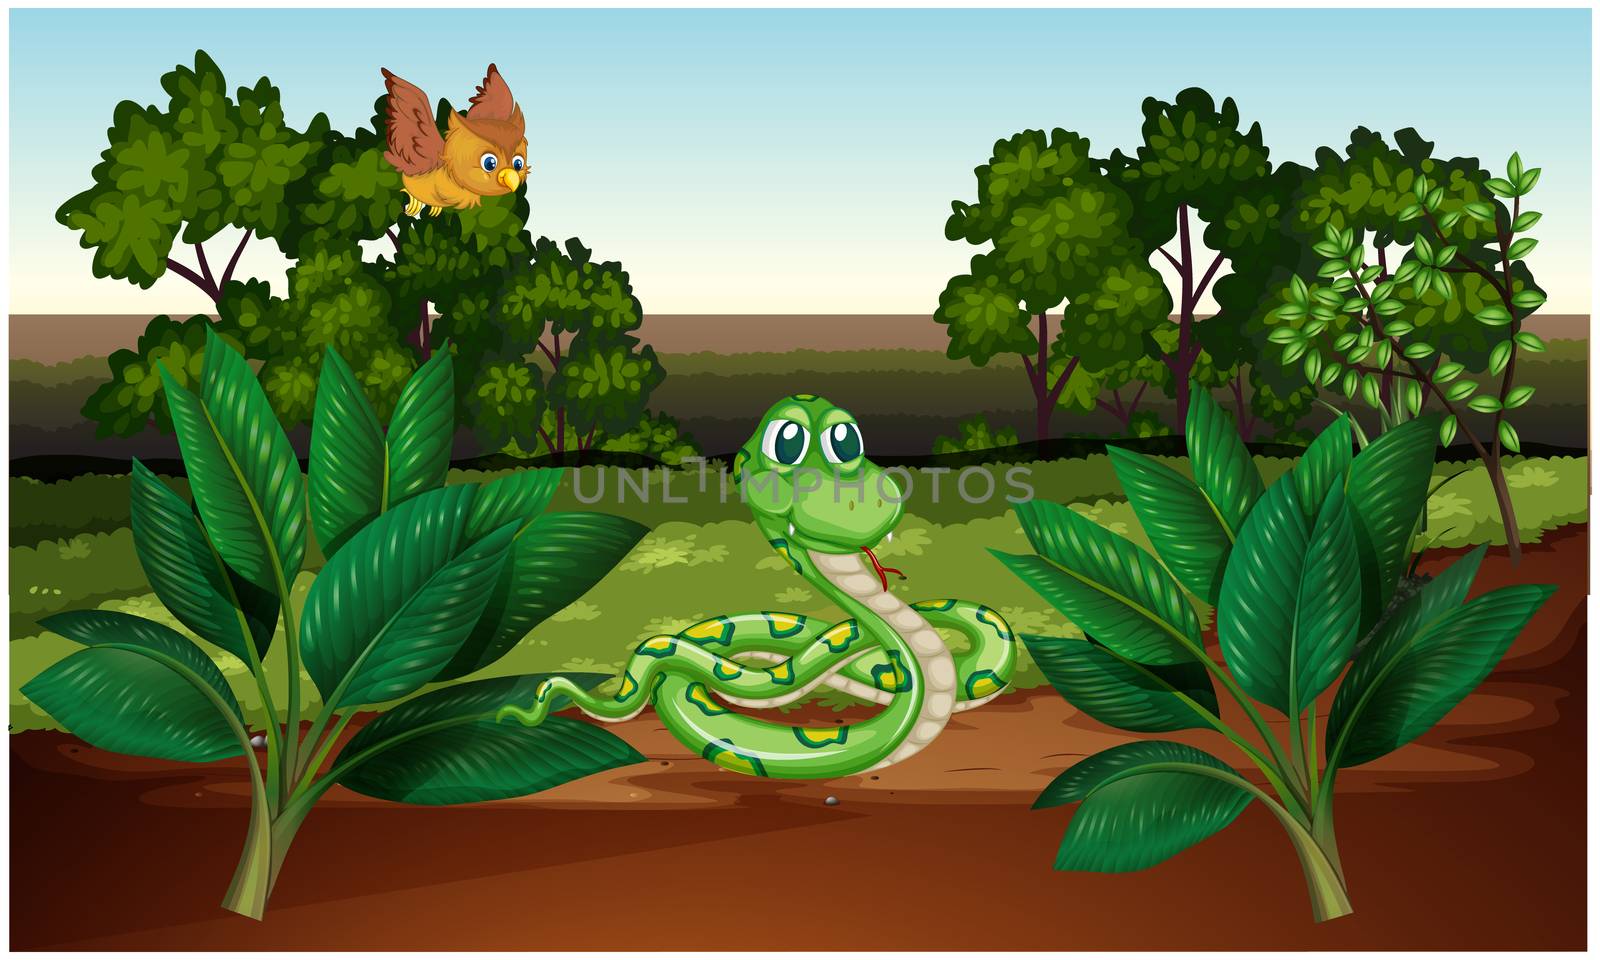 snake and owl are playing together in the forest by aanavcreationsplus